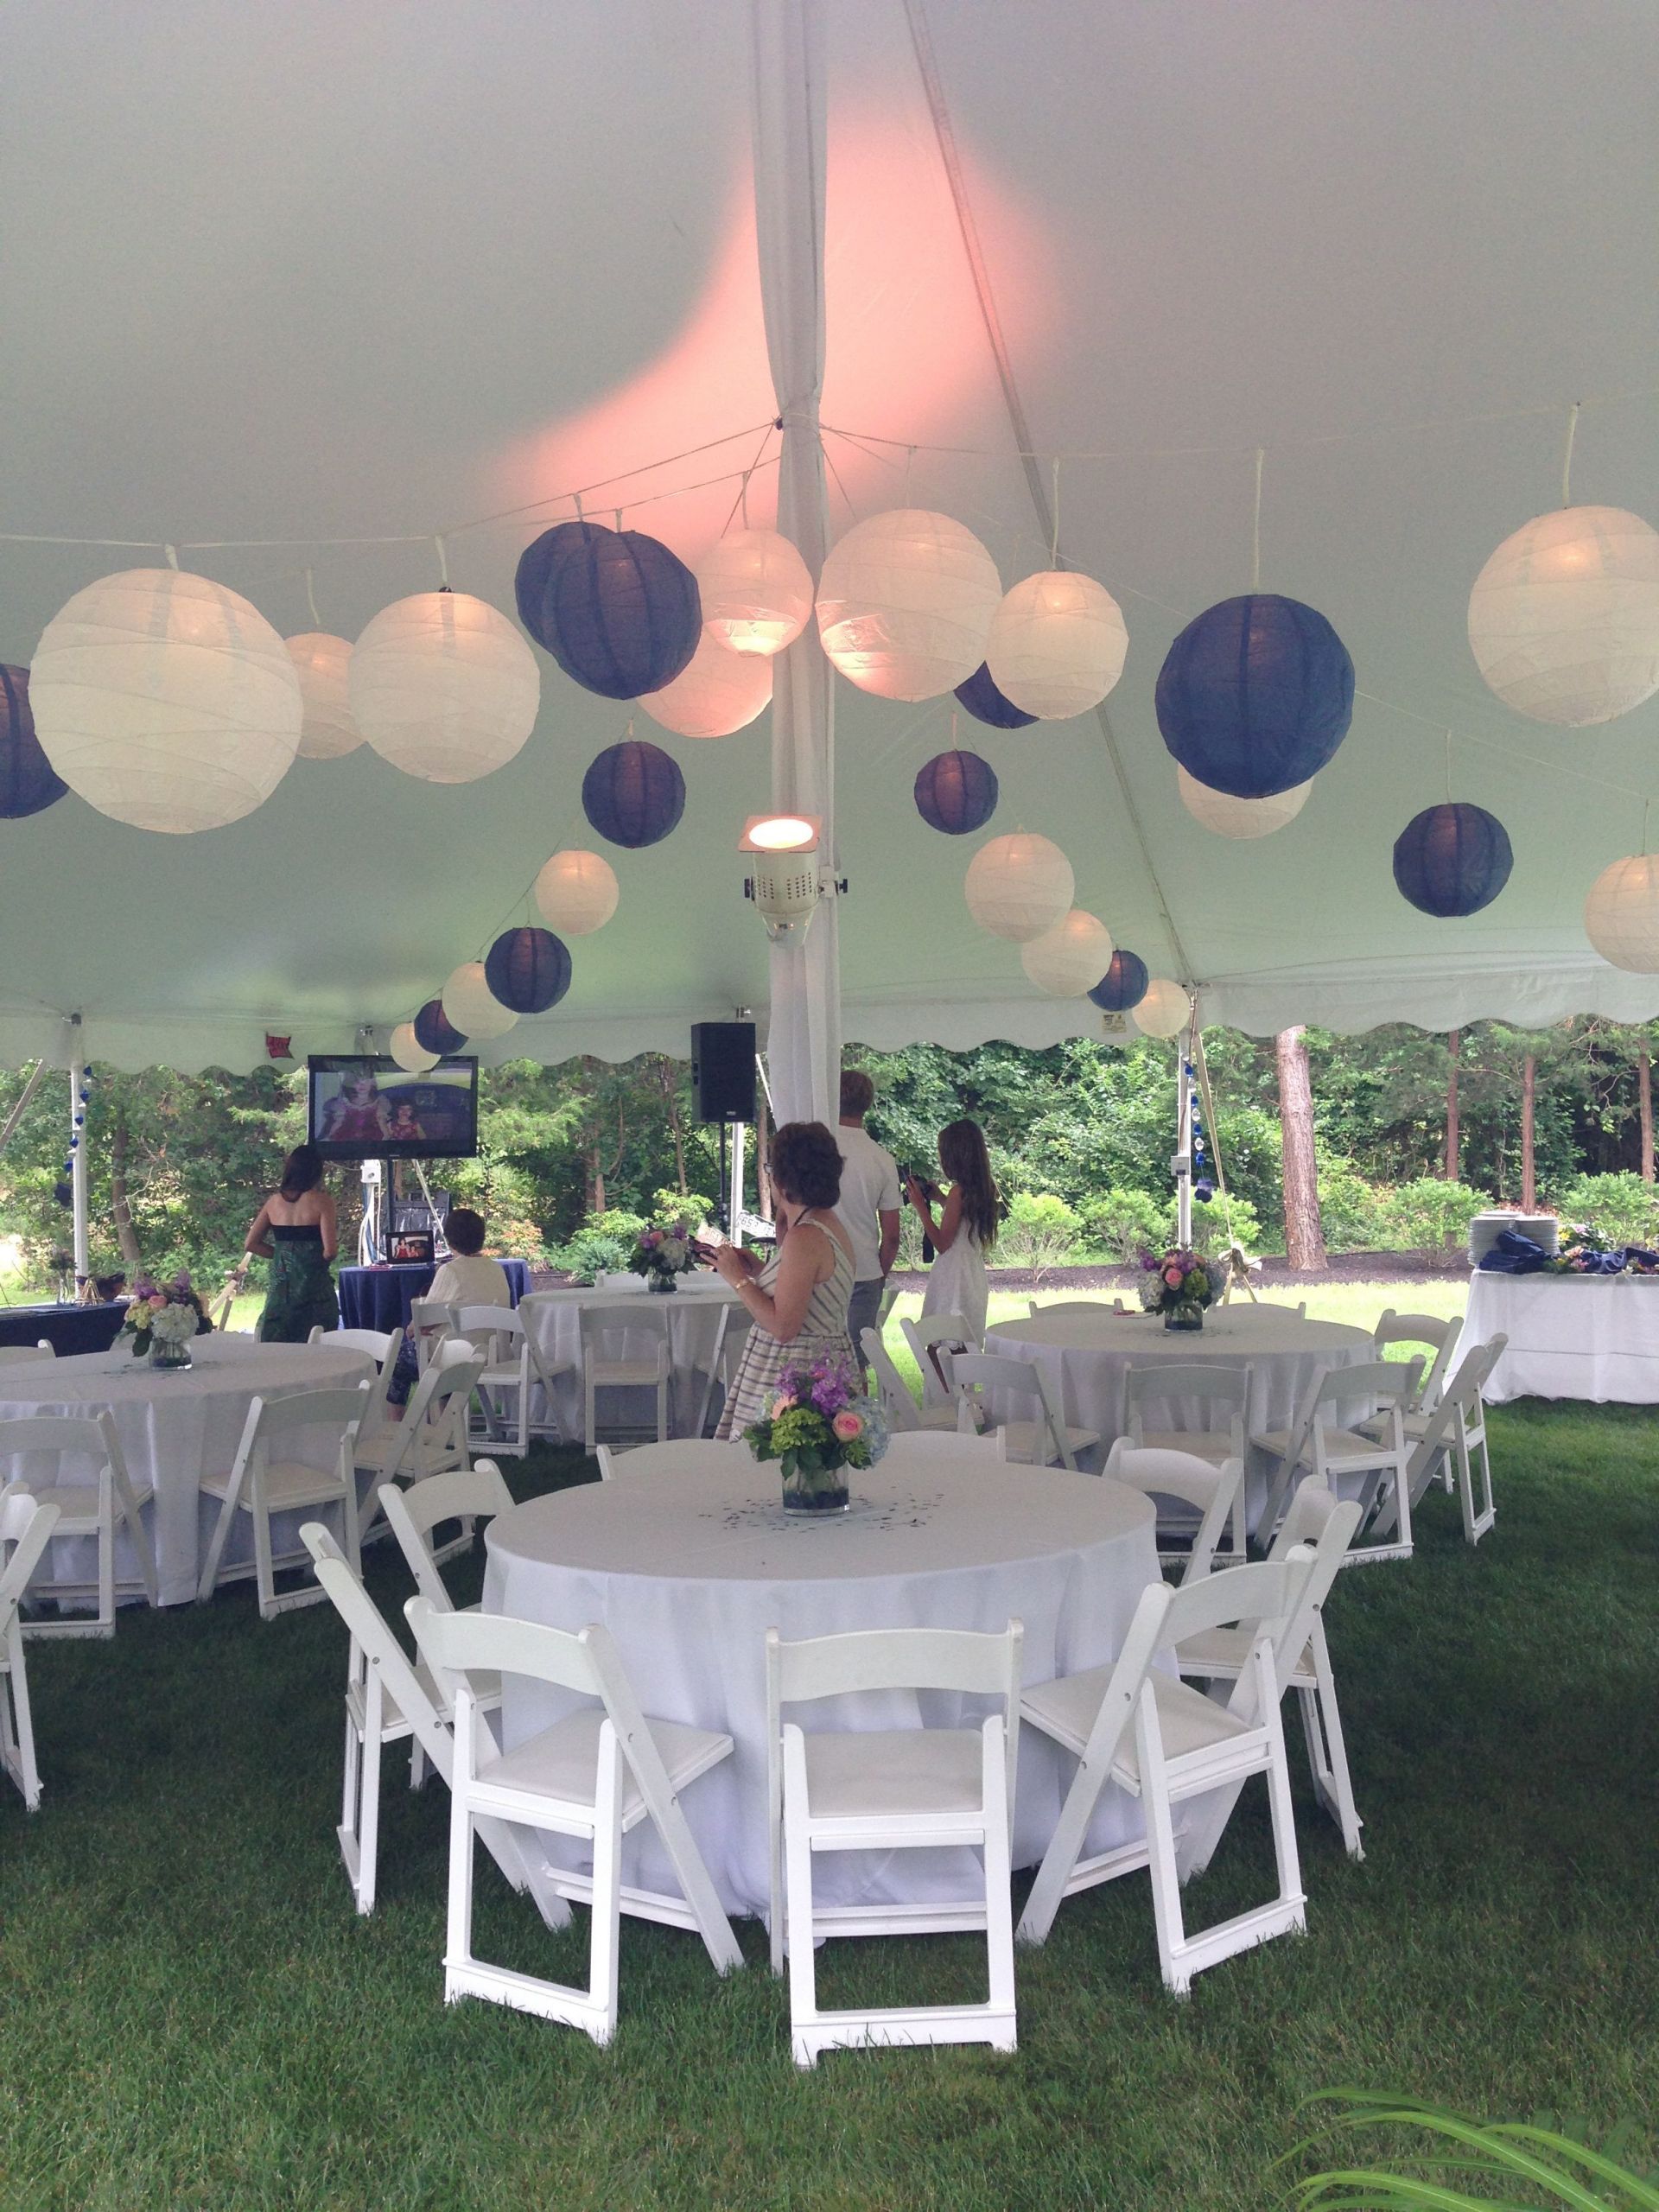 Outdoor College Graduation Party Ideas
 Tented blue and white graduation party